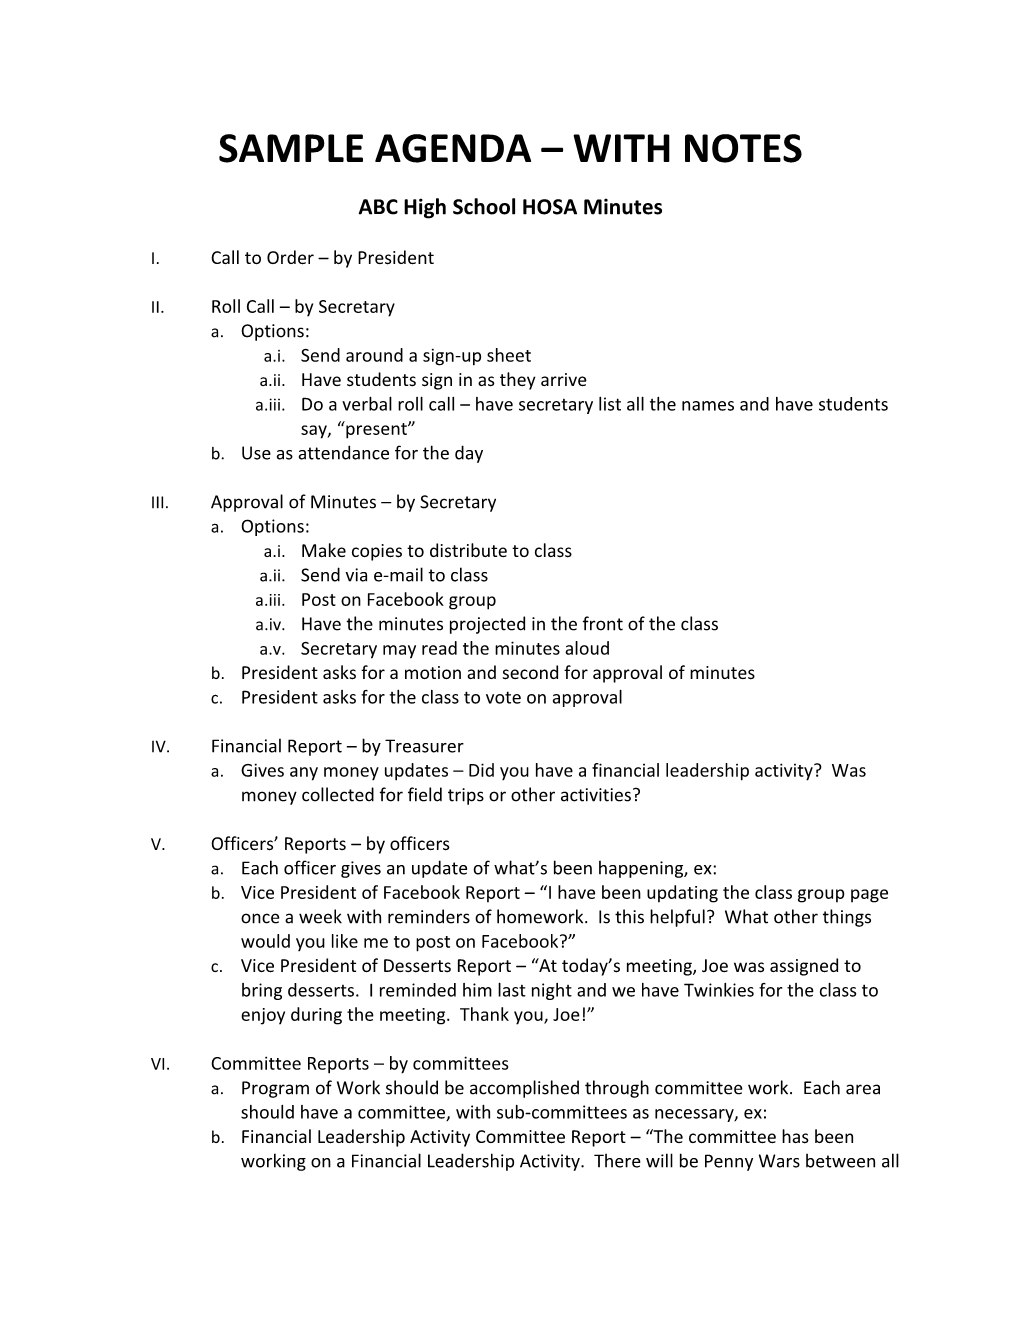 Sample Agenda with Notes